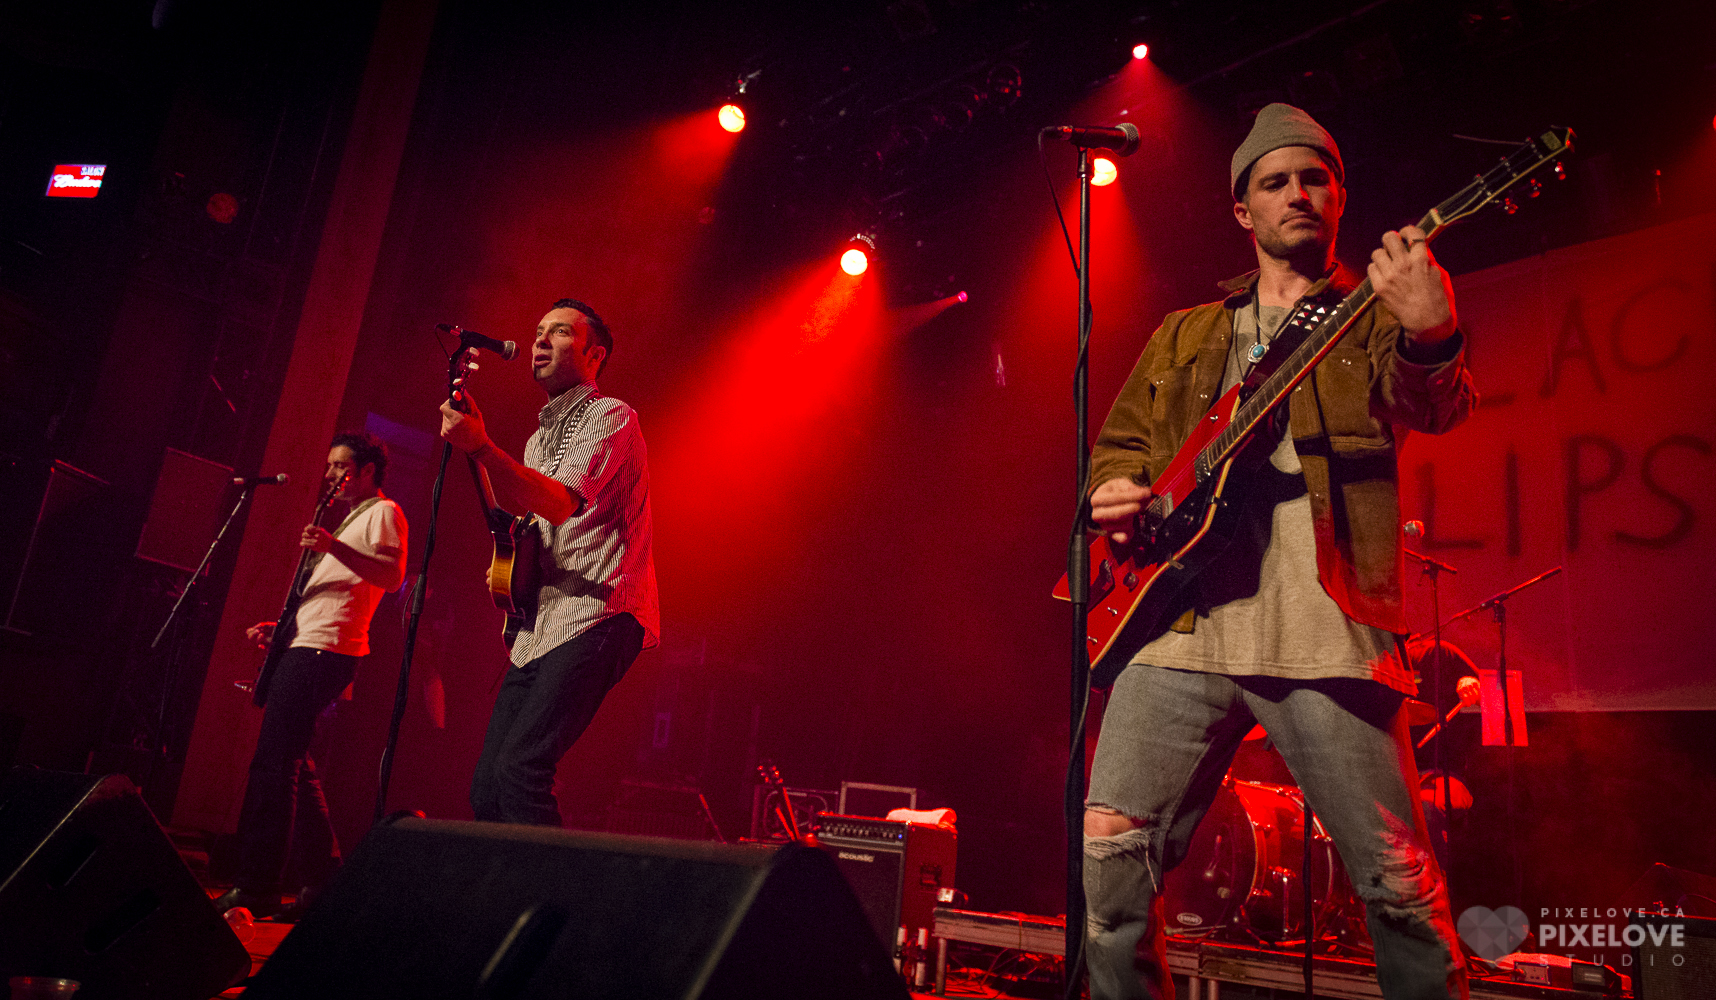 Black Lips, Natural Child, and Red Mass performed at Corona Theatre on April 21st 2014 in Montreal.